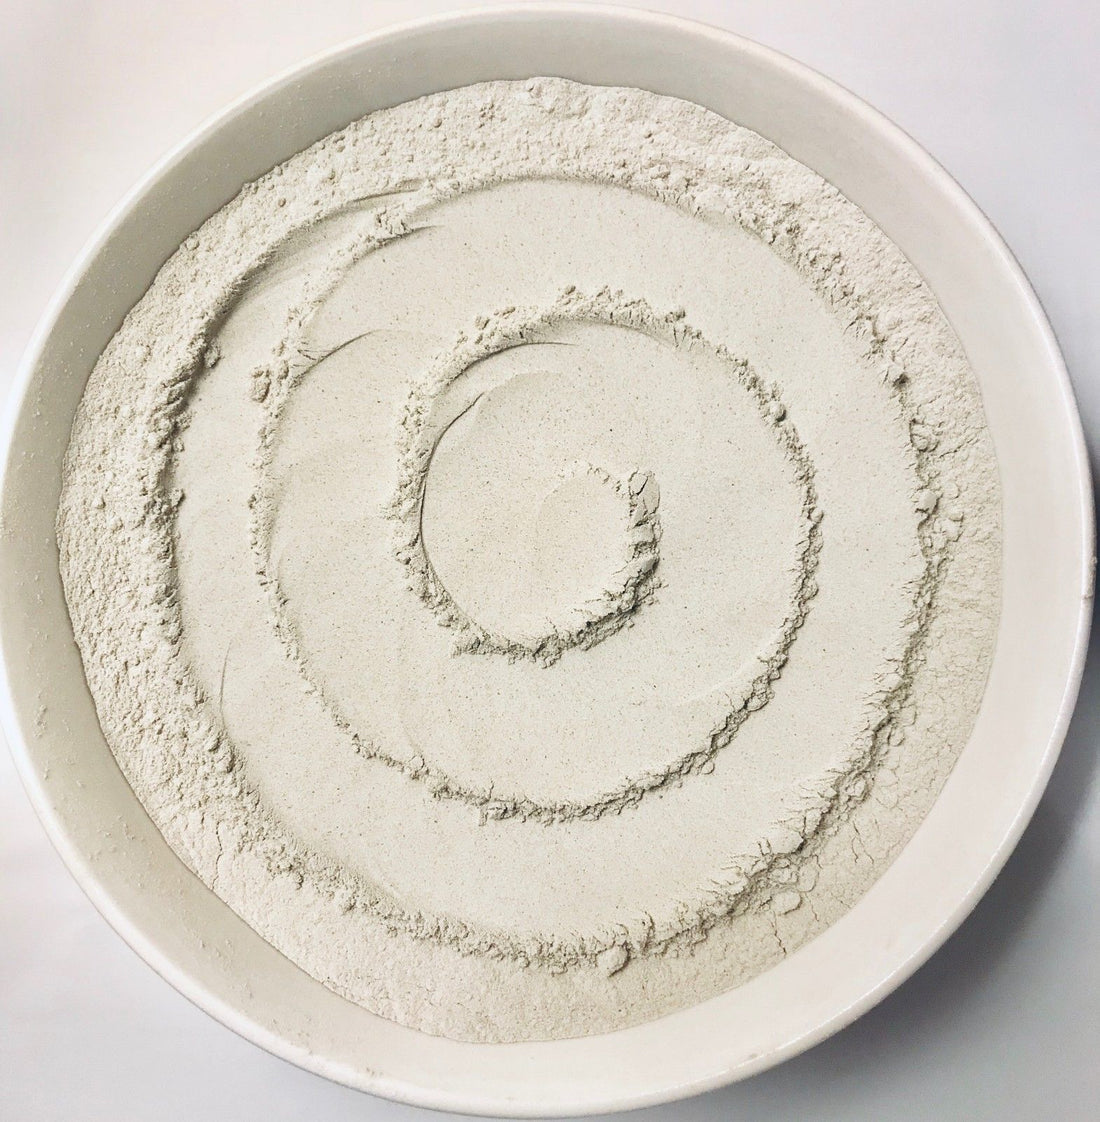 Create your gentle and effective cleansing powder using White kaolin clay